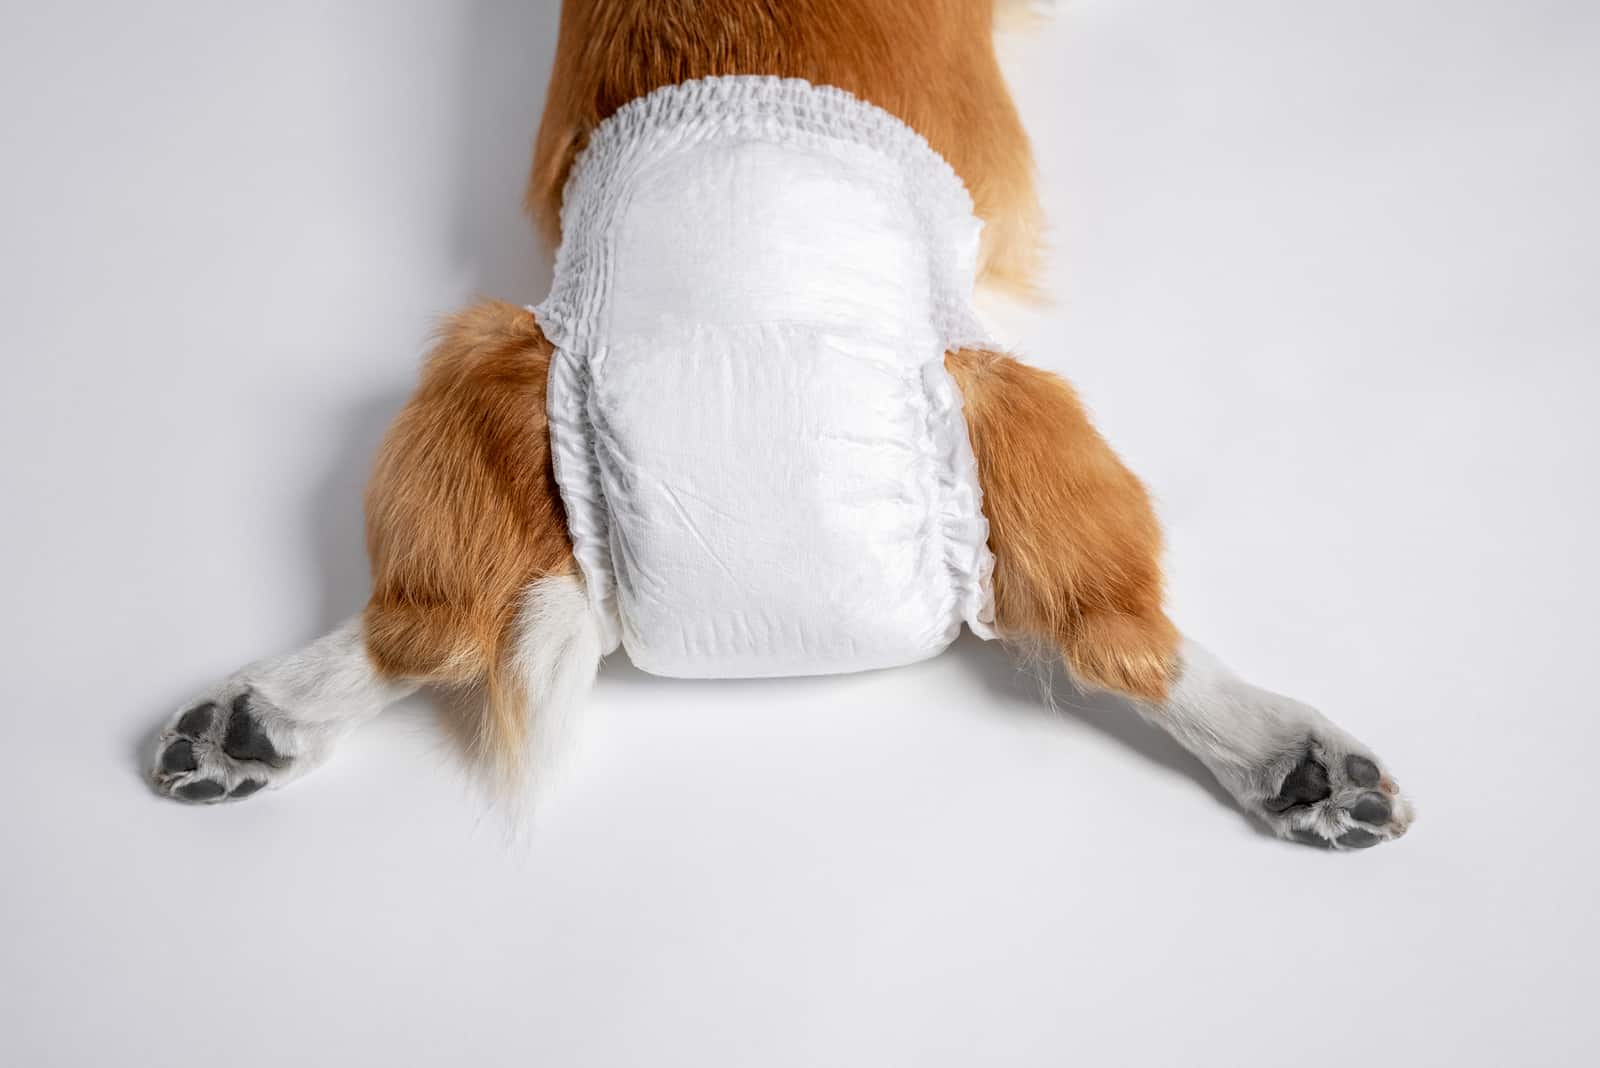 welsh corgi Pembroke lies in a special diaper spreading its paws